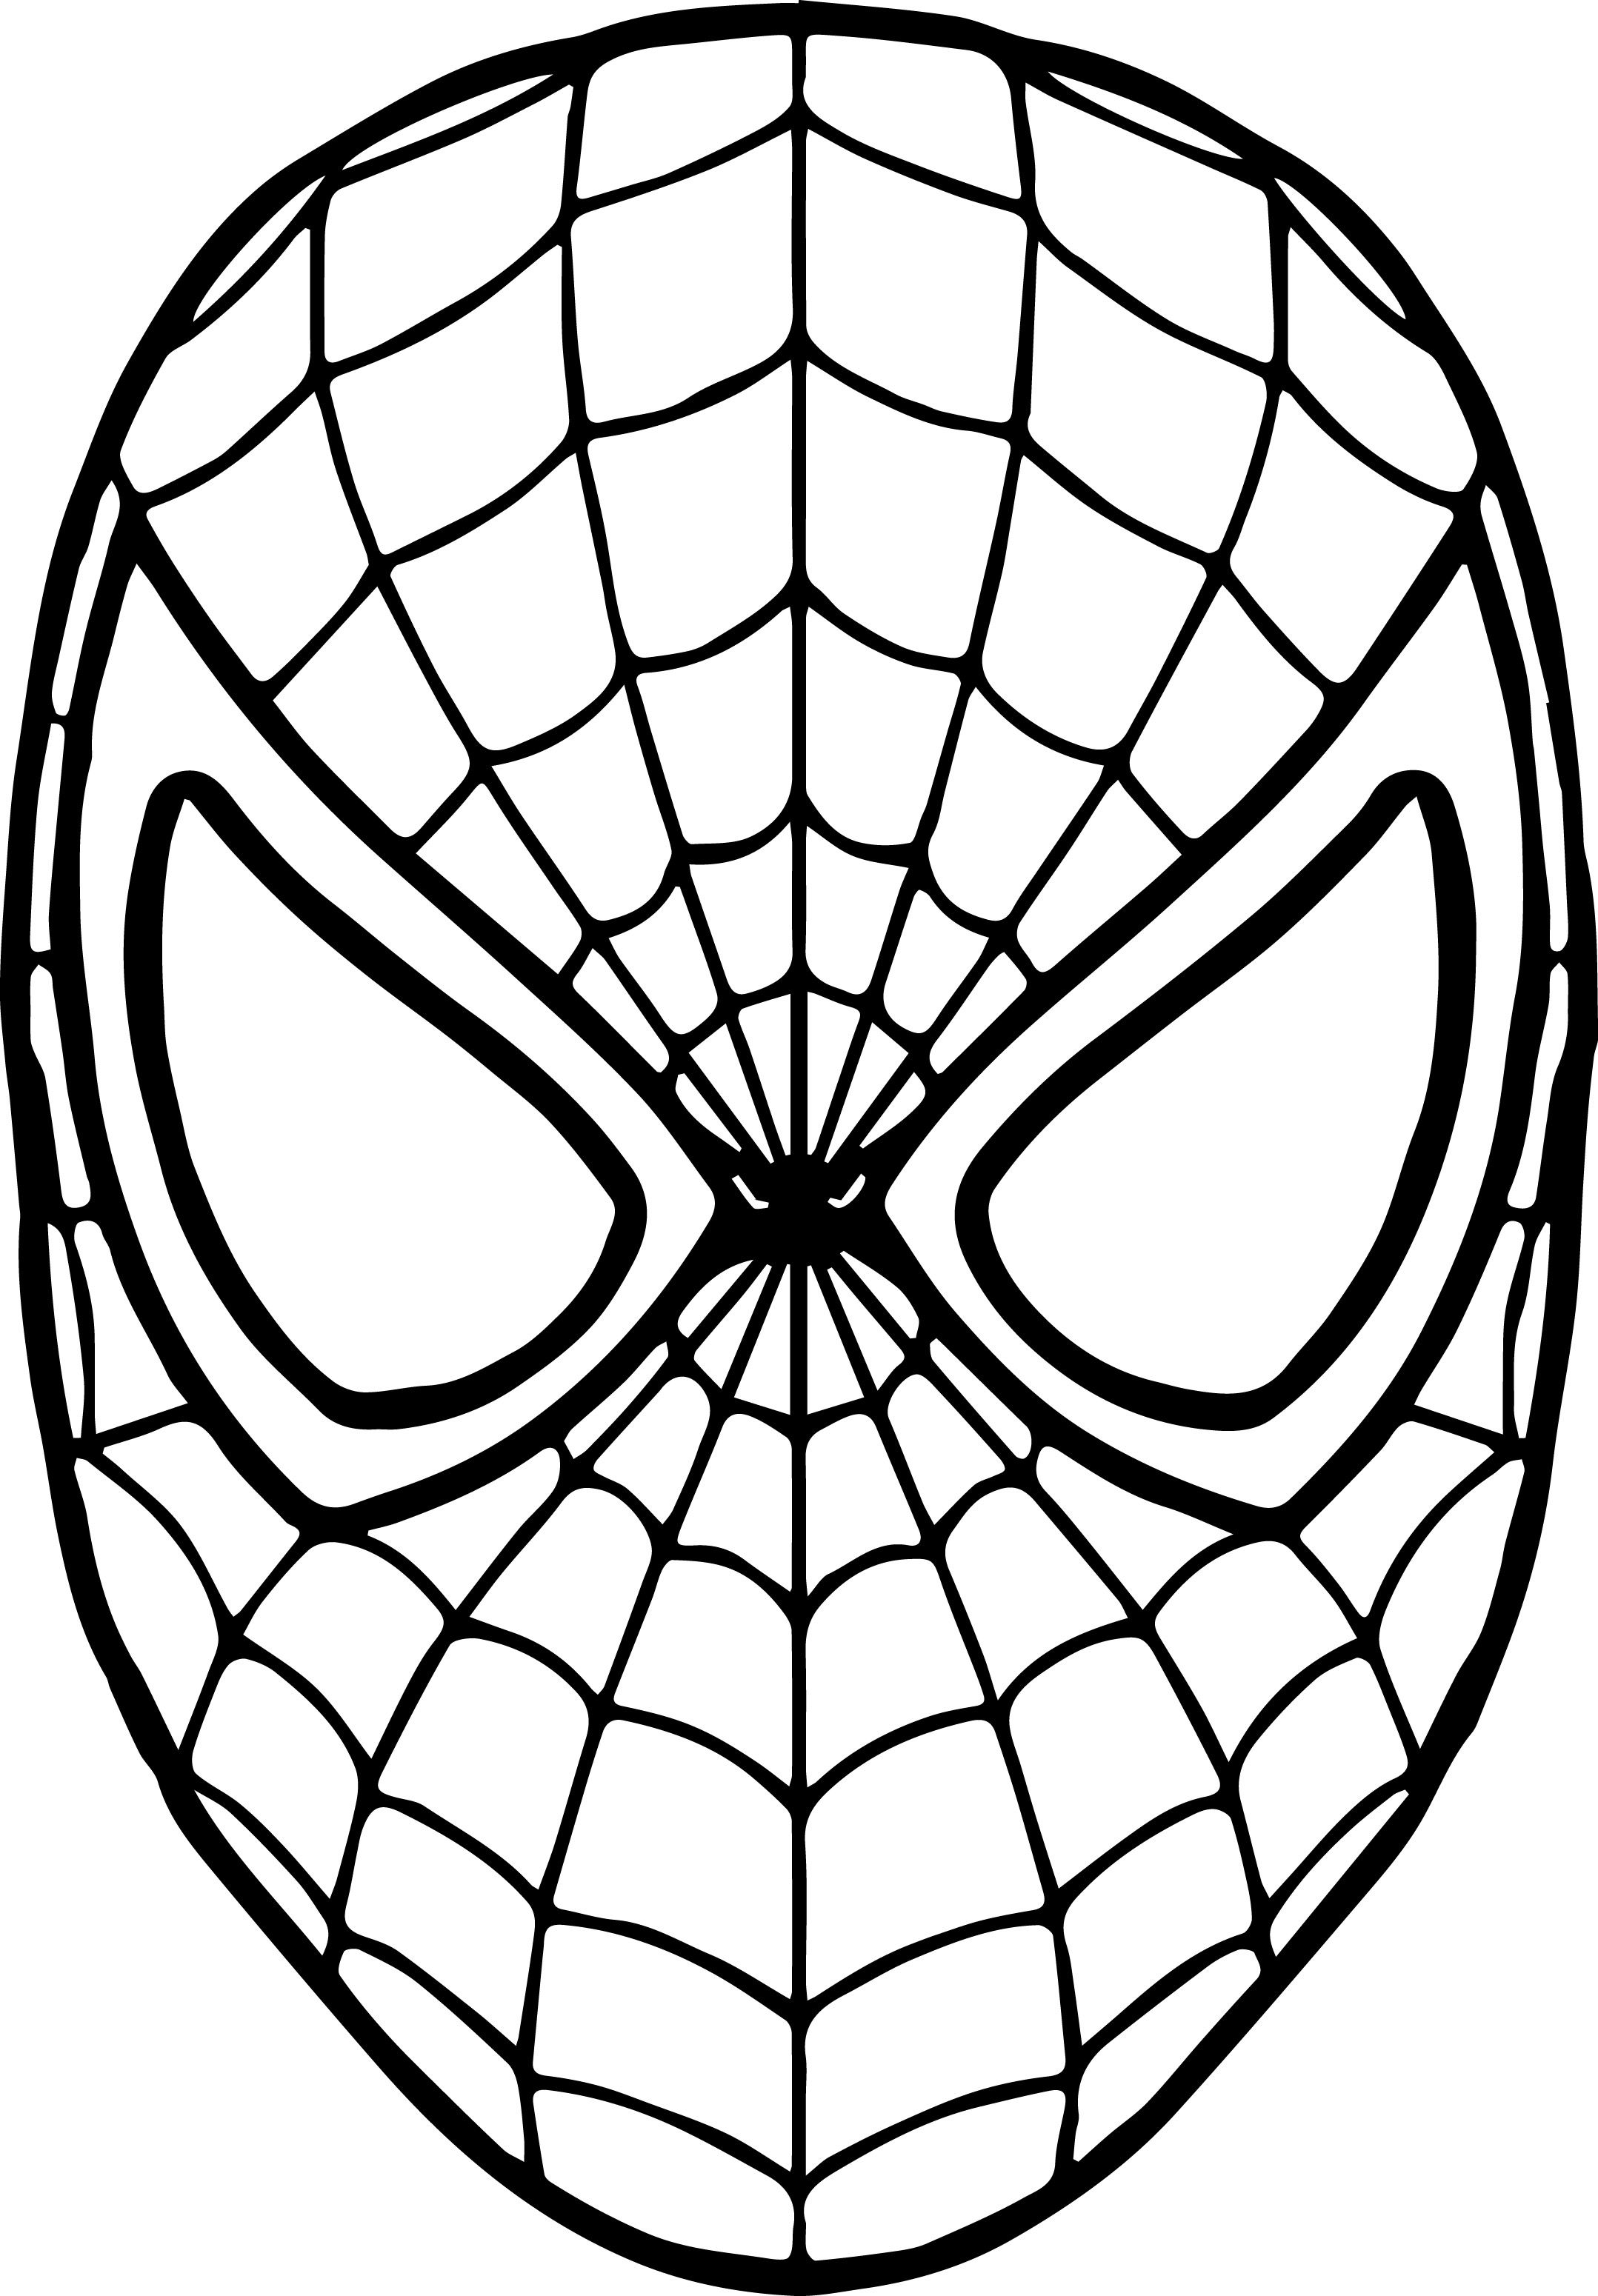 Spiderman Mask Coloring Pages - Coloring Home